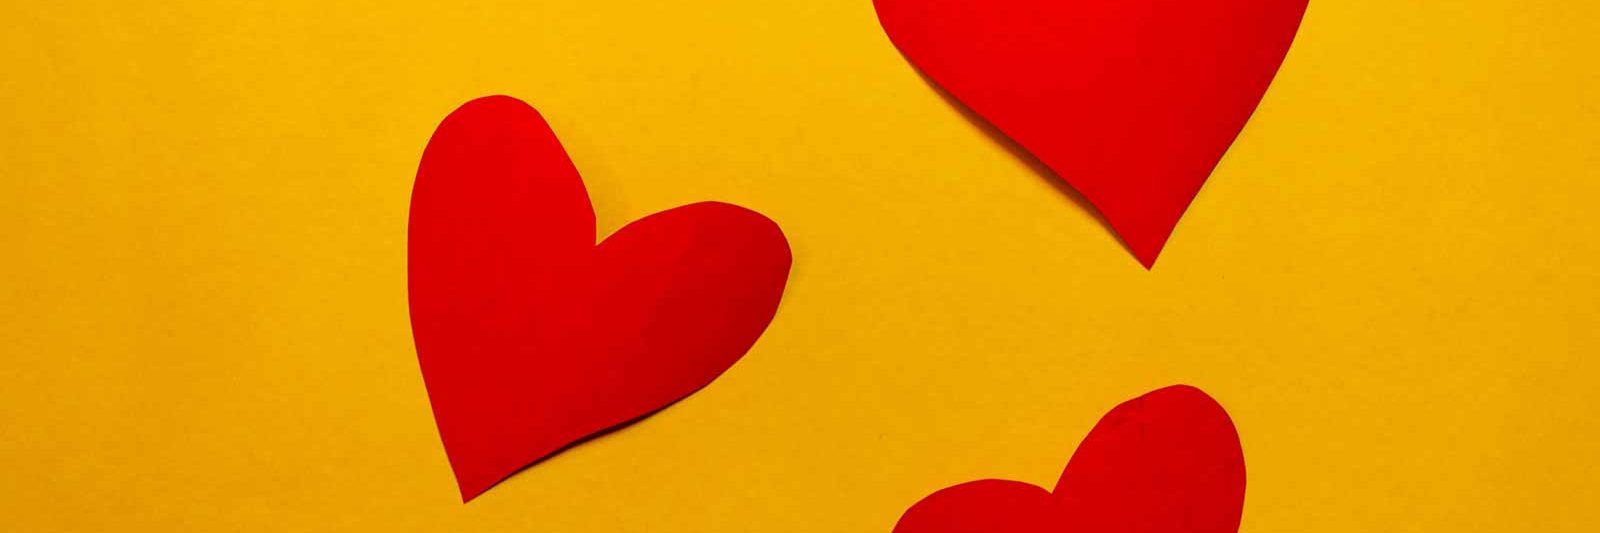 3 red paper hearts on a bright yellow background